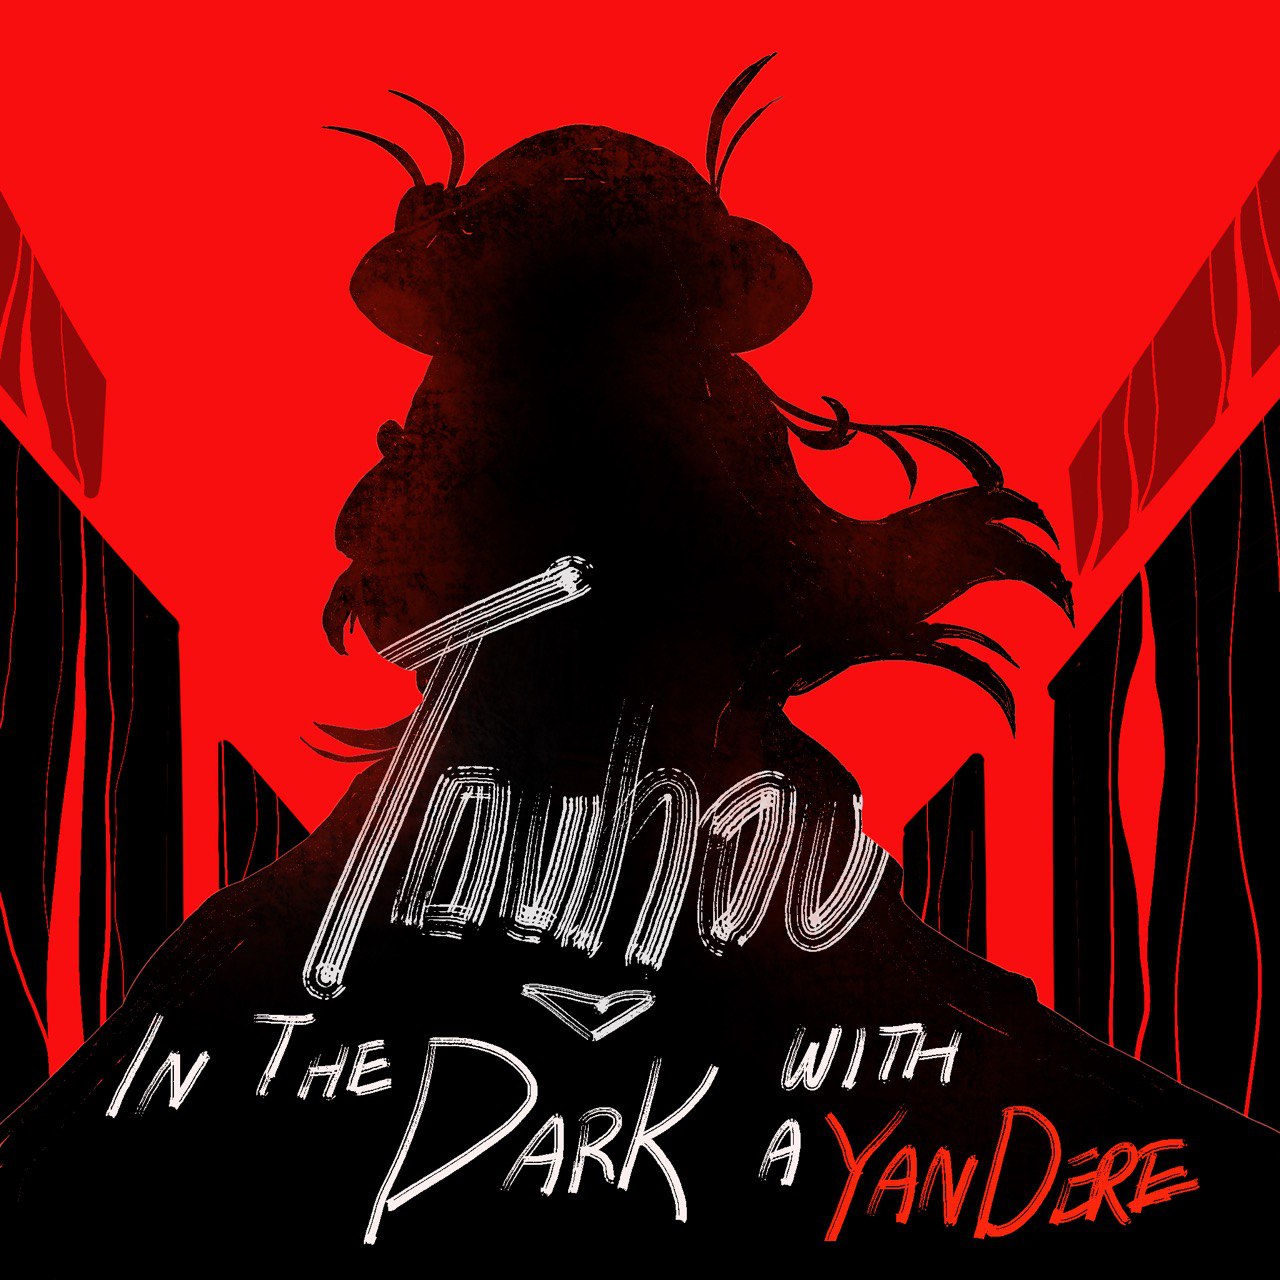 Touhou: In the dark with a yandere